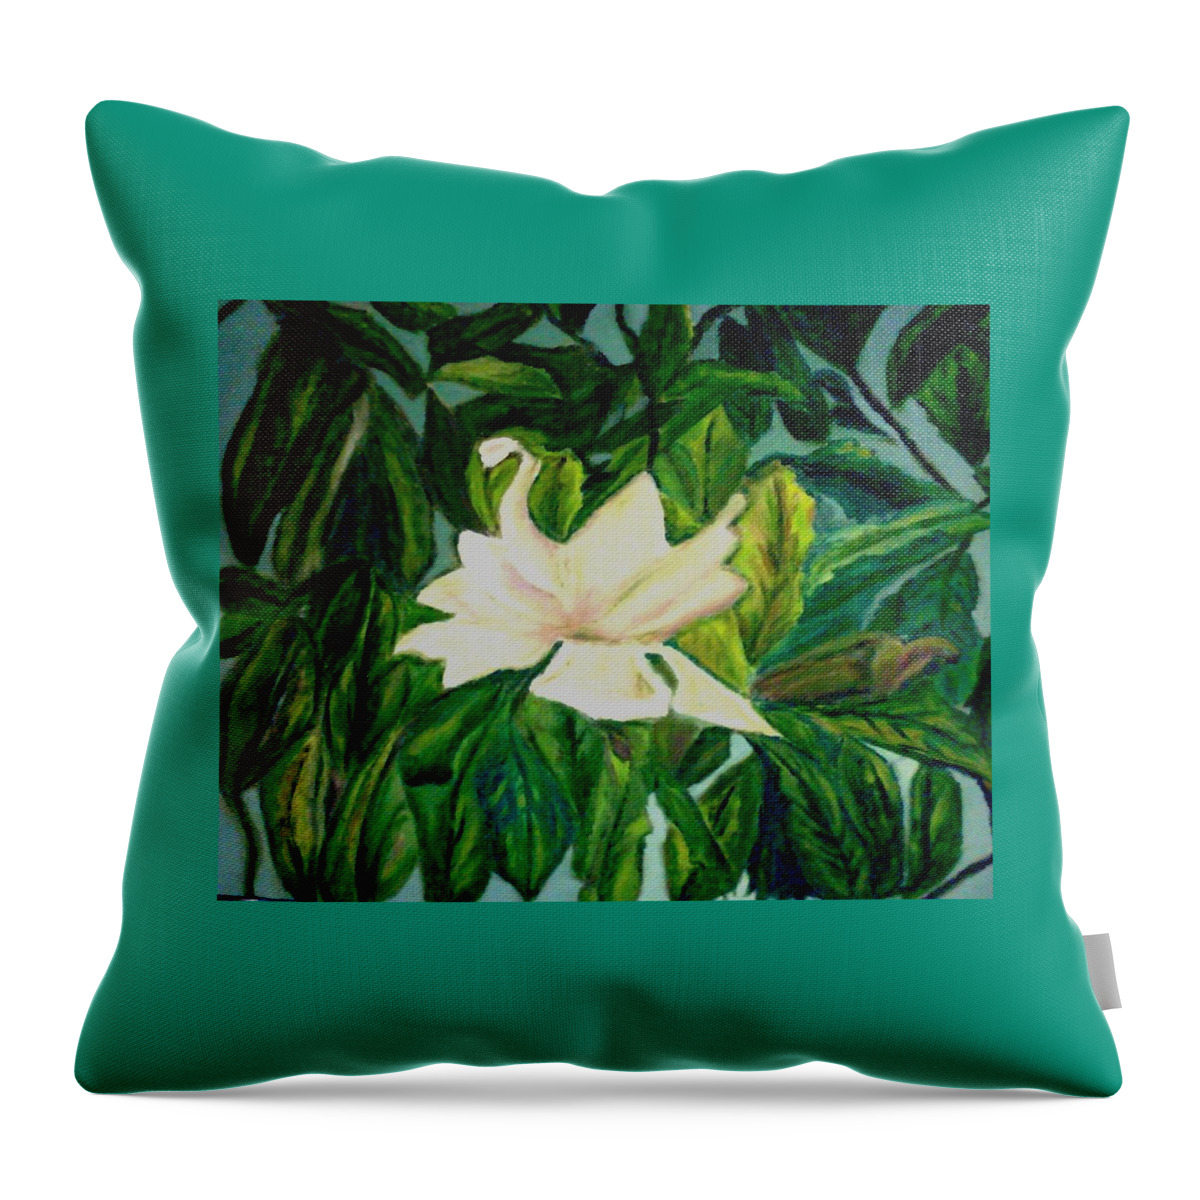 Flower Throw Pillow featuring the painting Williamsburg Magnolia by Suzanne Berthier